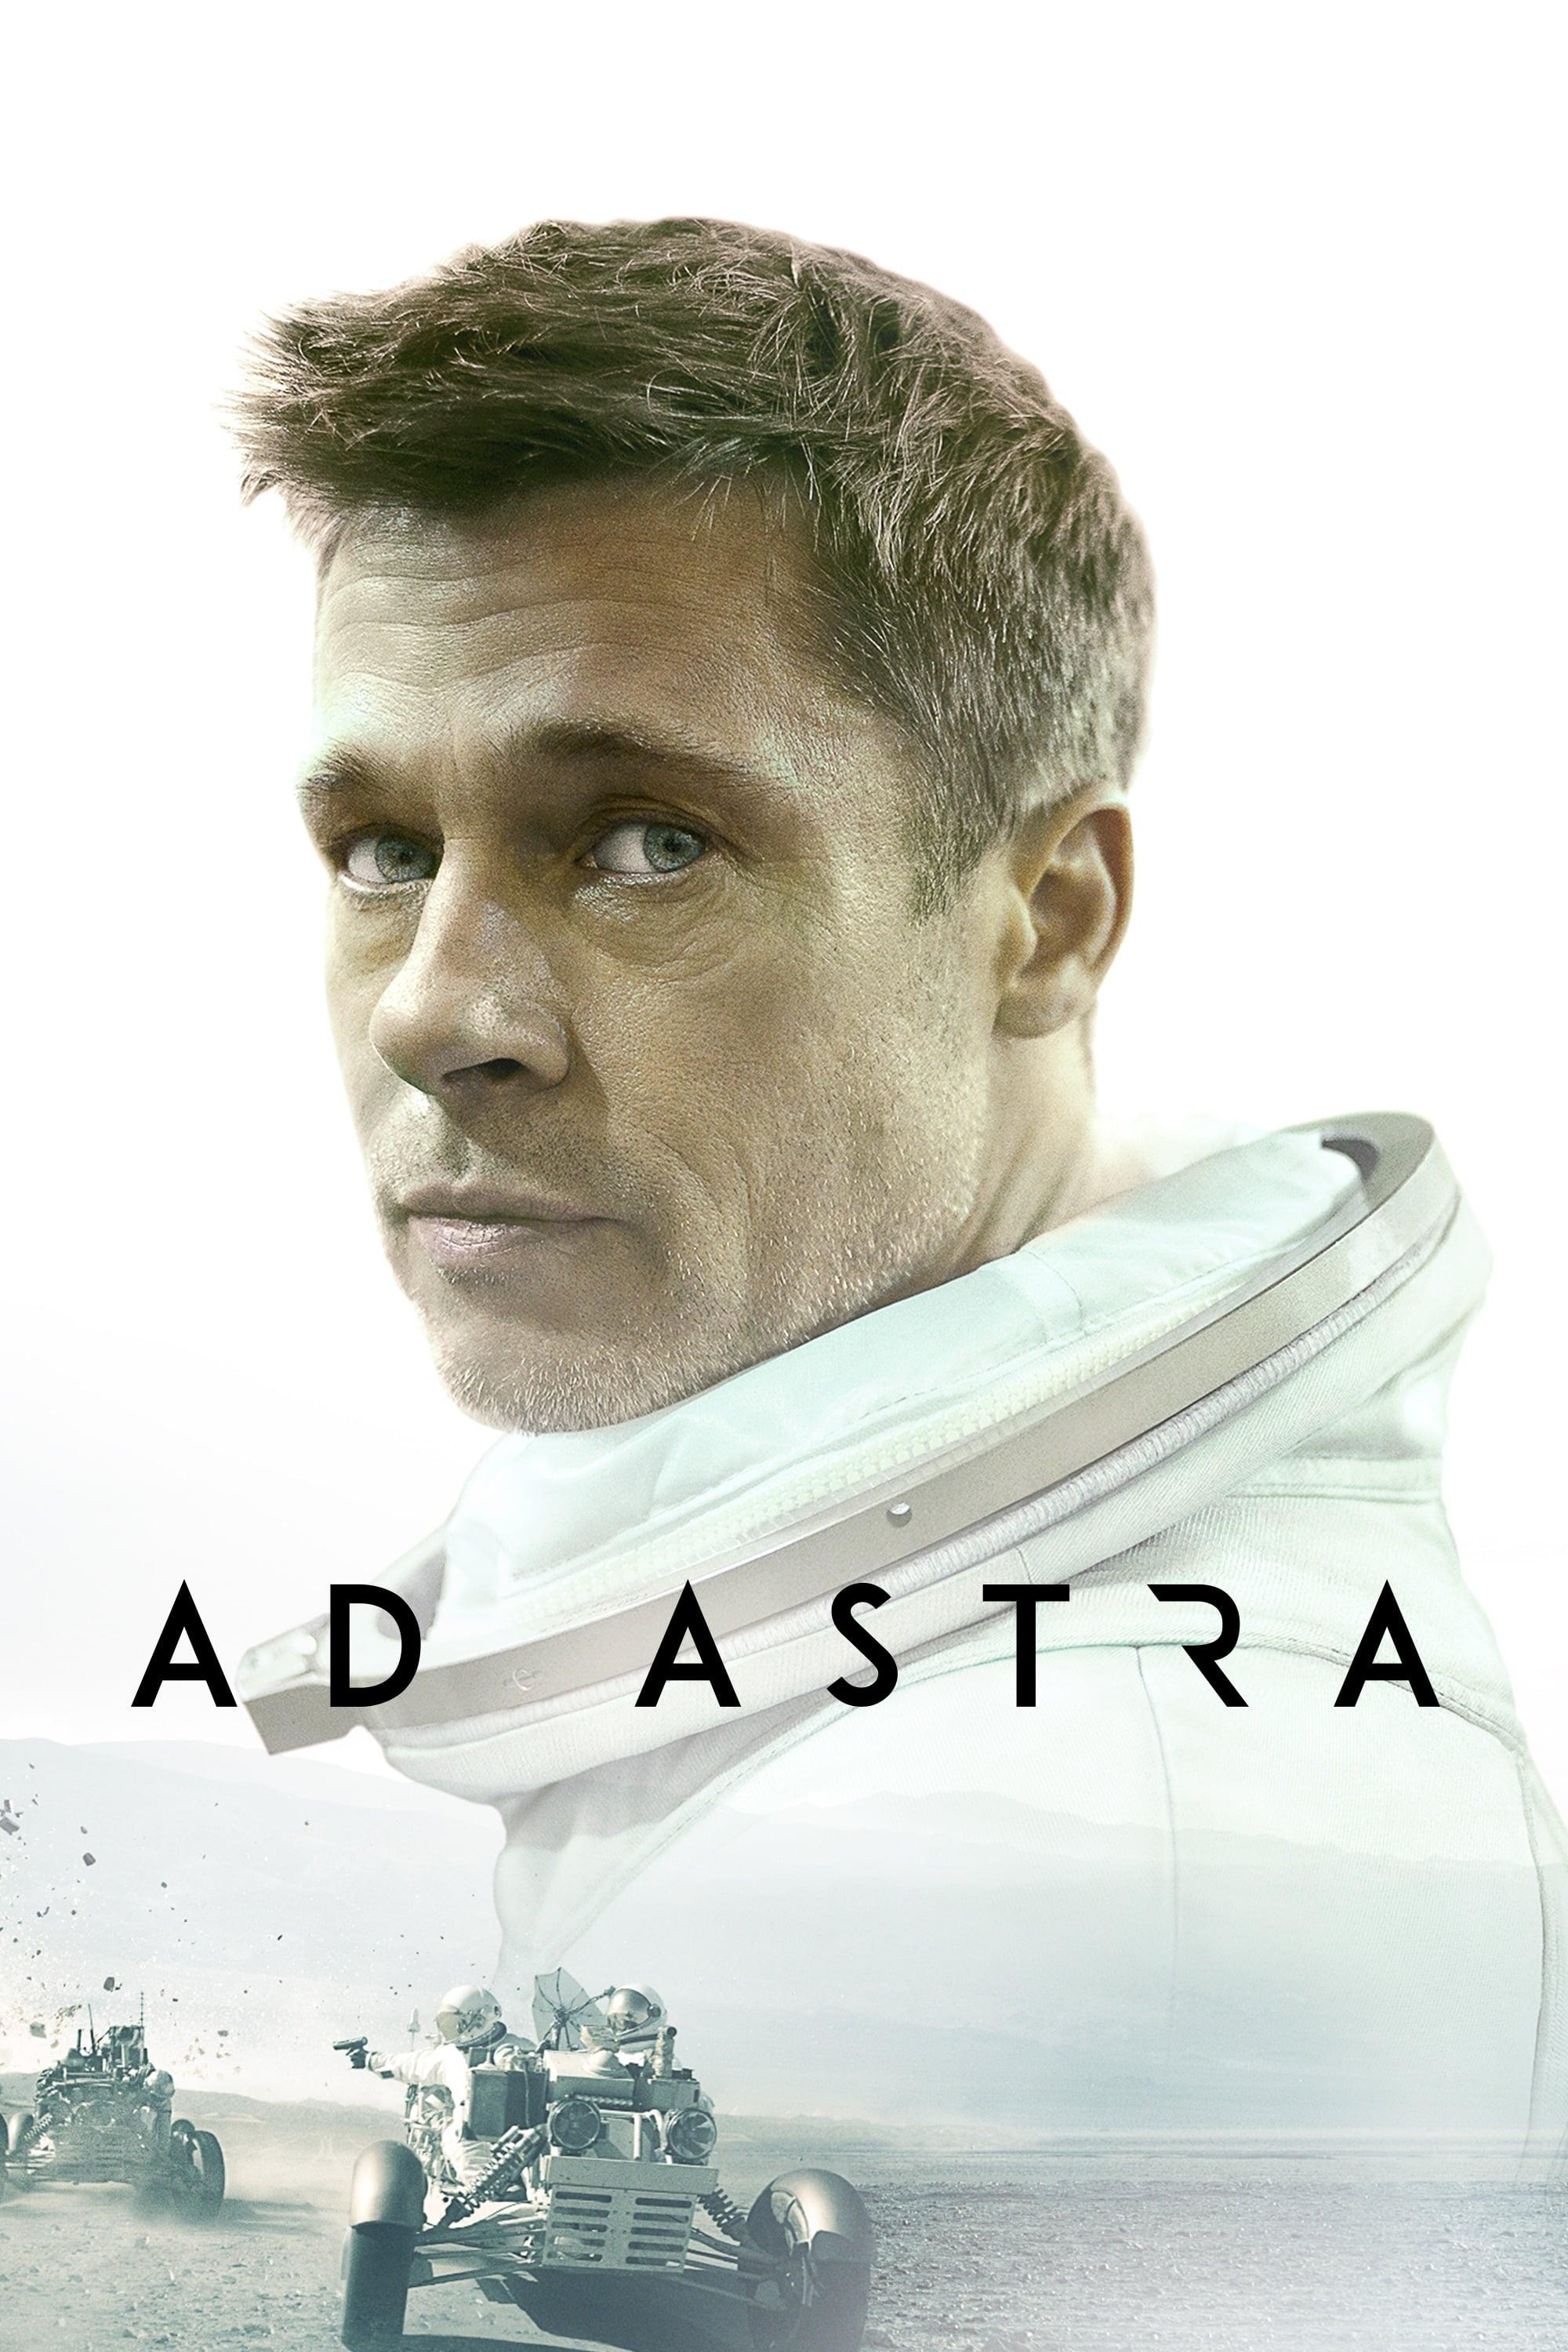 Ad Astra poster